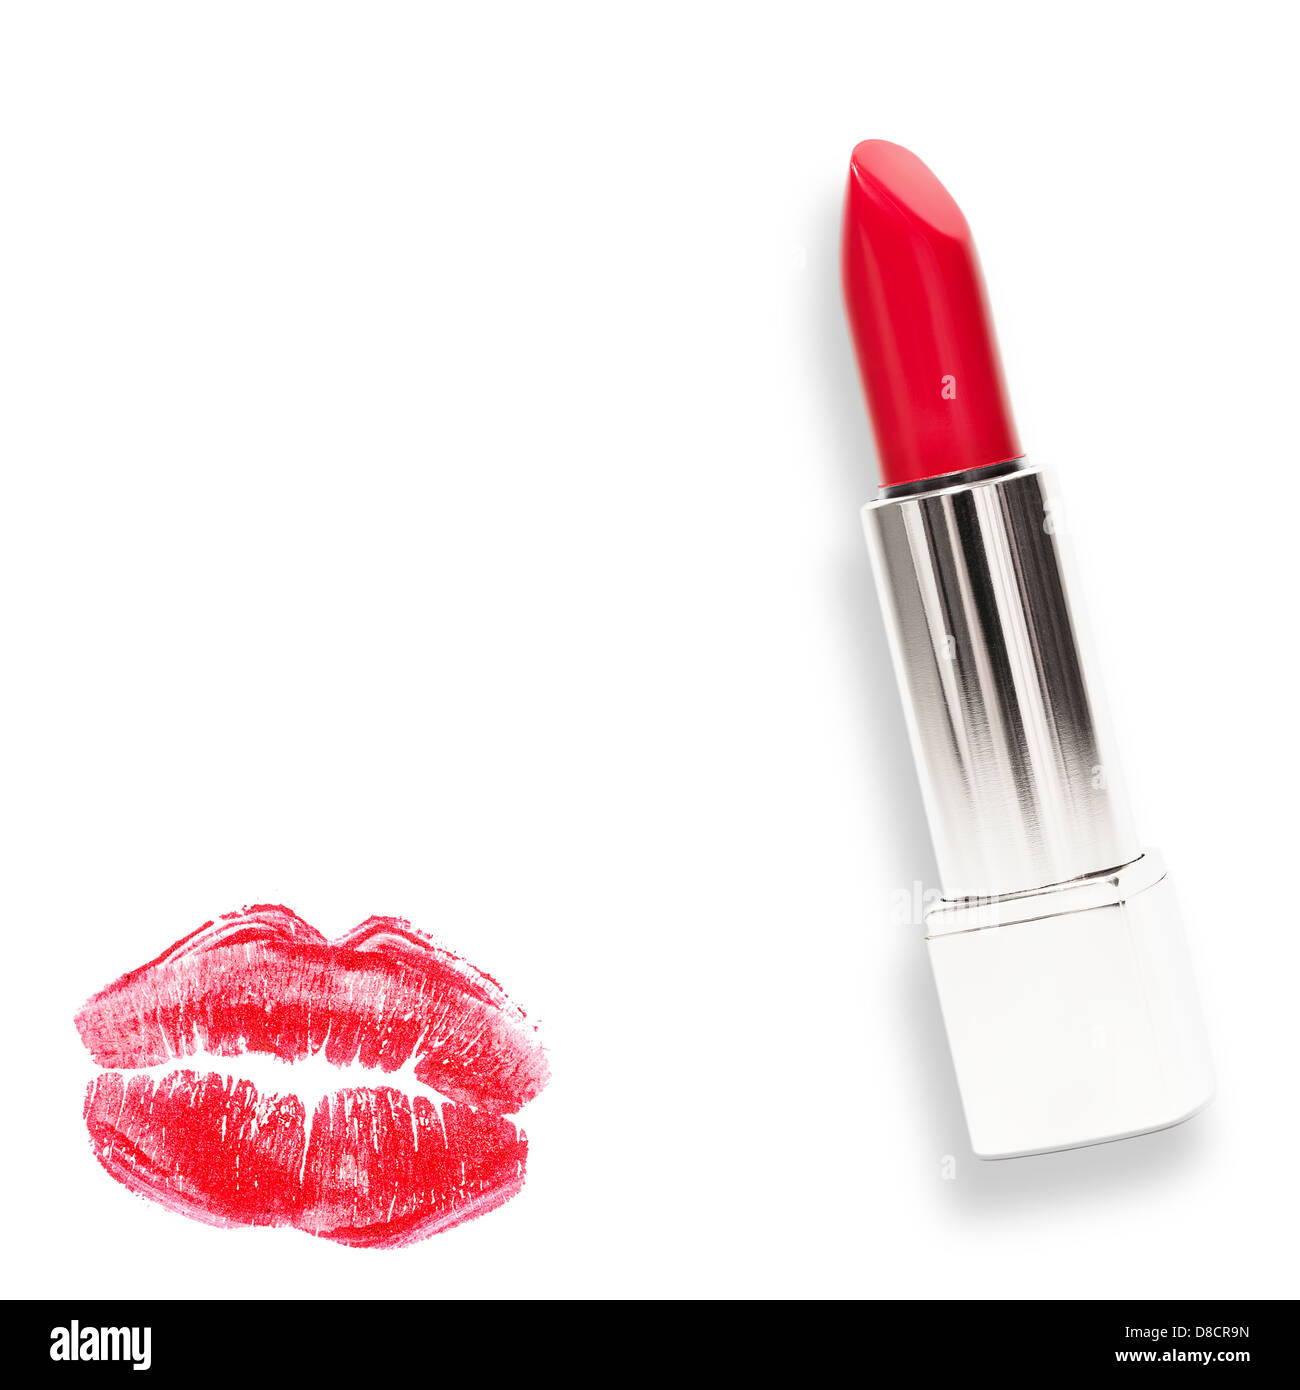 Lipstick and lipstick kiss mark, isolated on white background Stock Photo